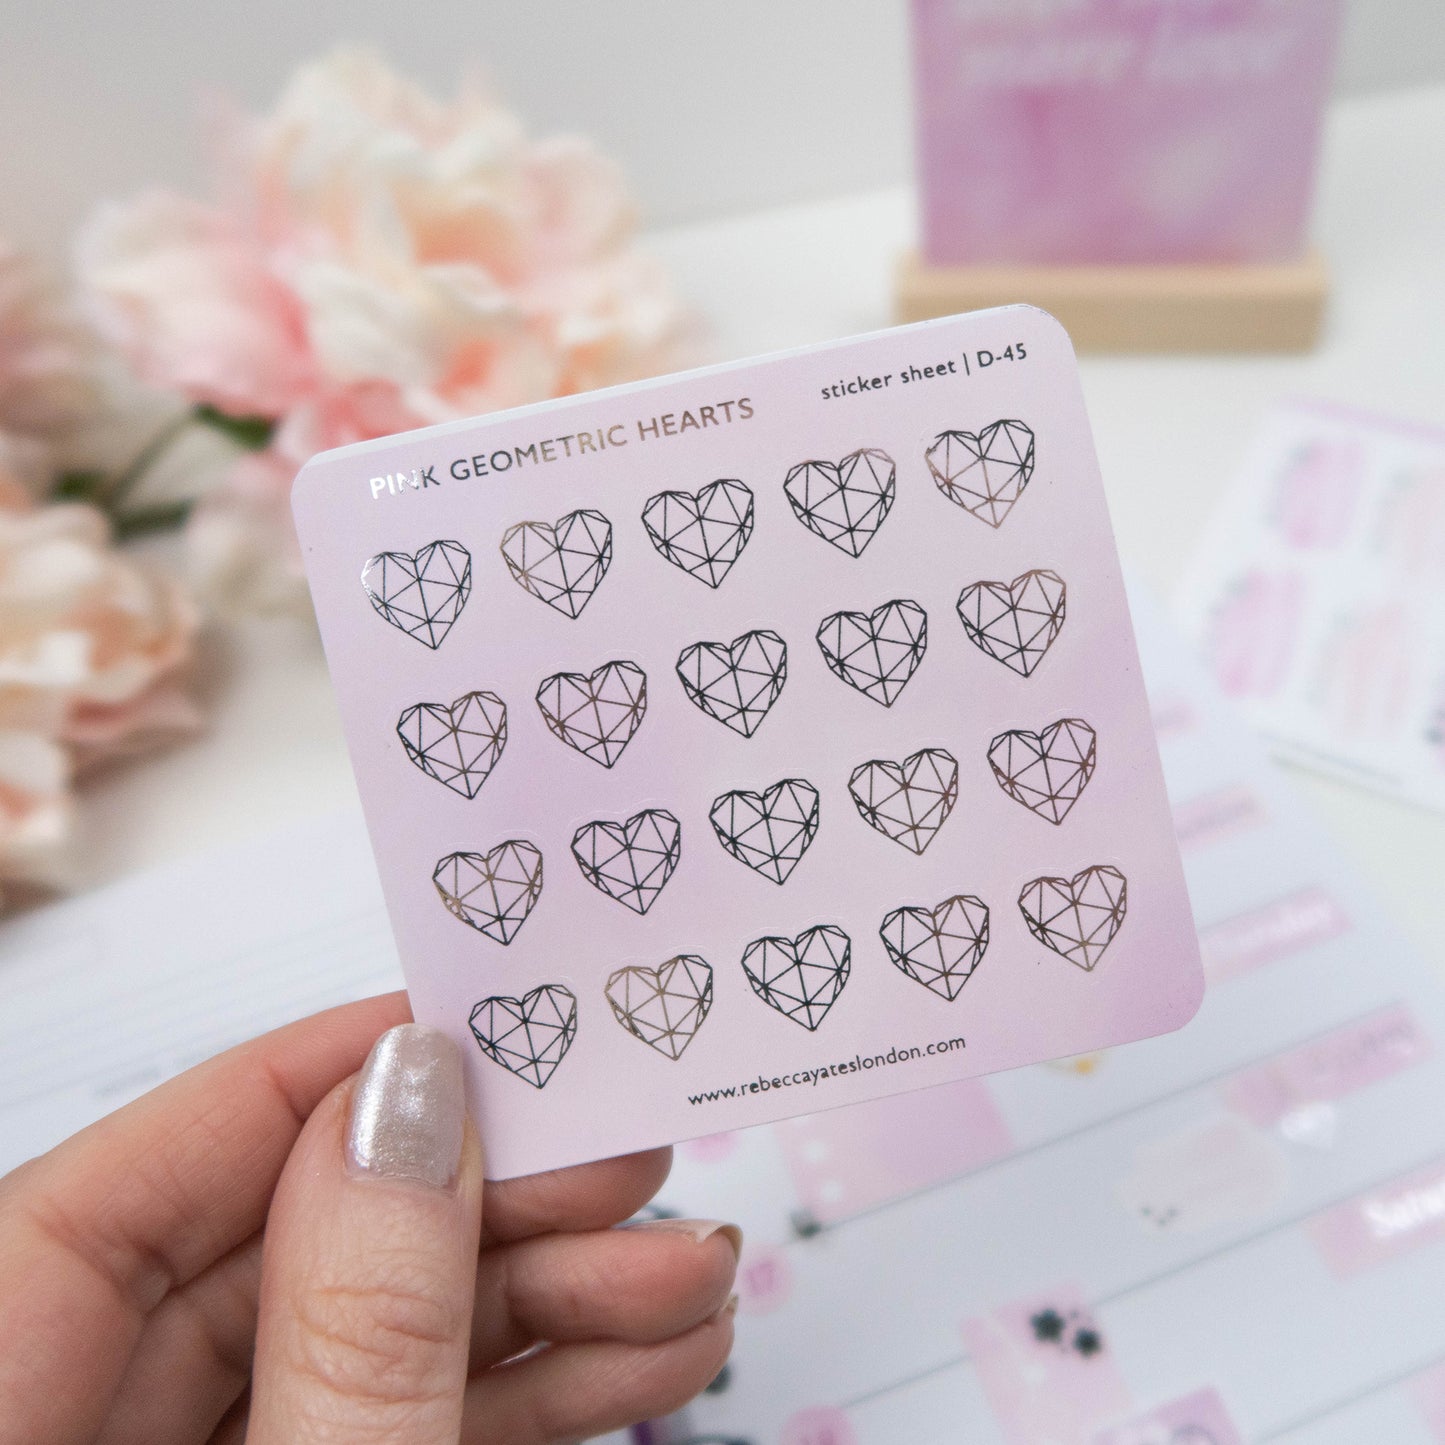 PINK GEOMETRIC HEARTS - FOILED PLANNER STICKERS